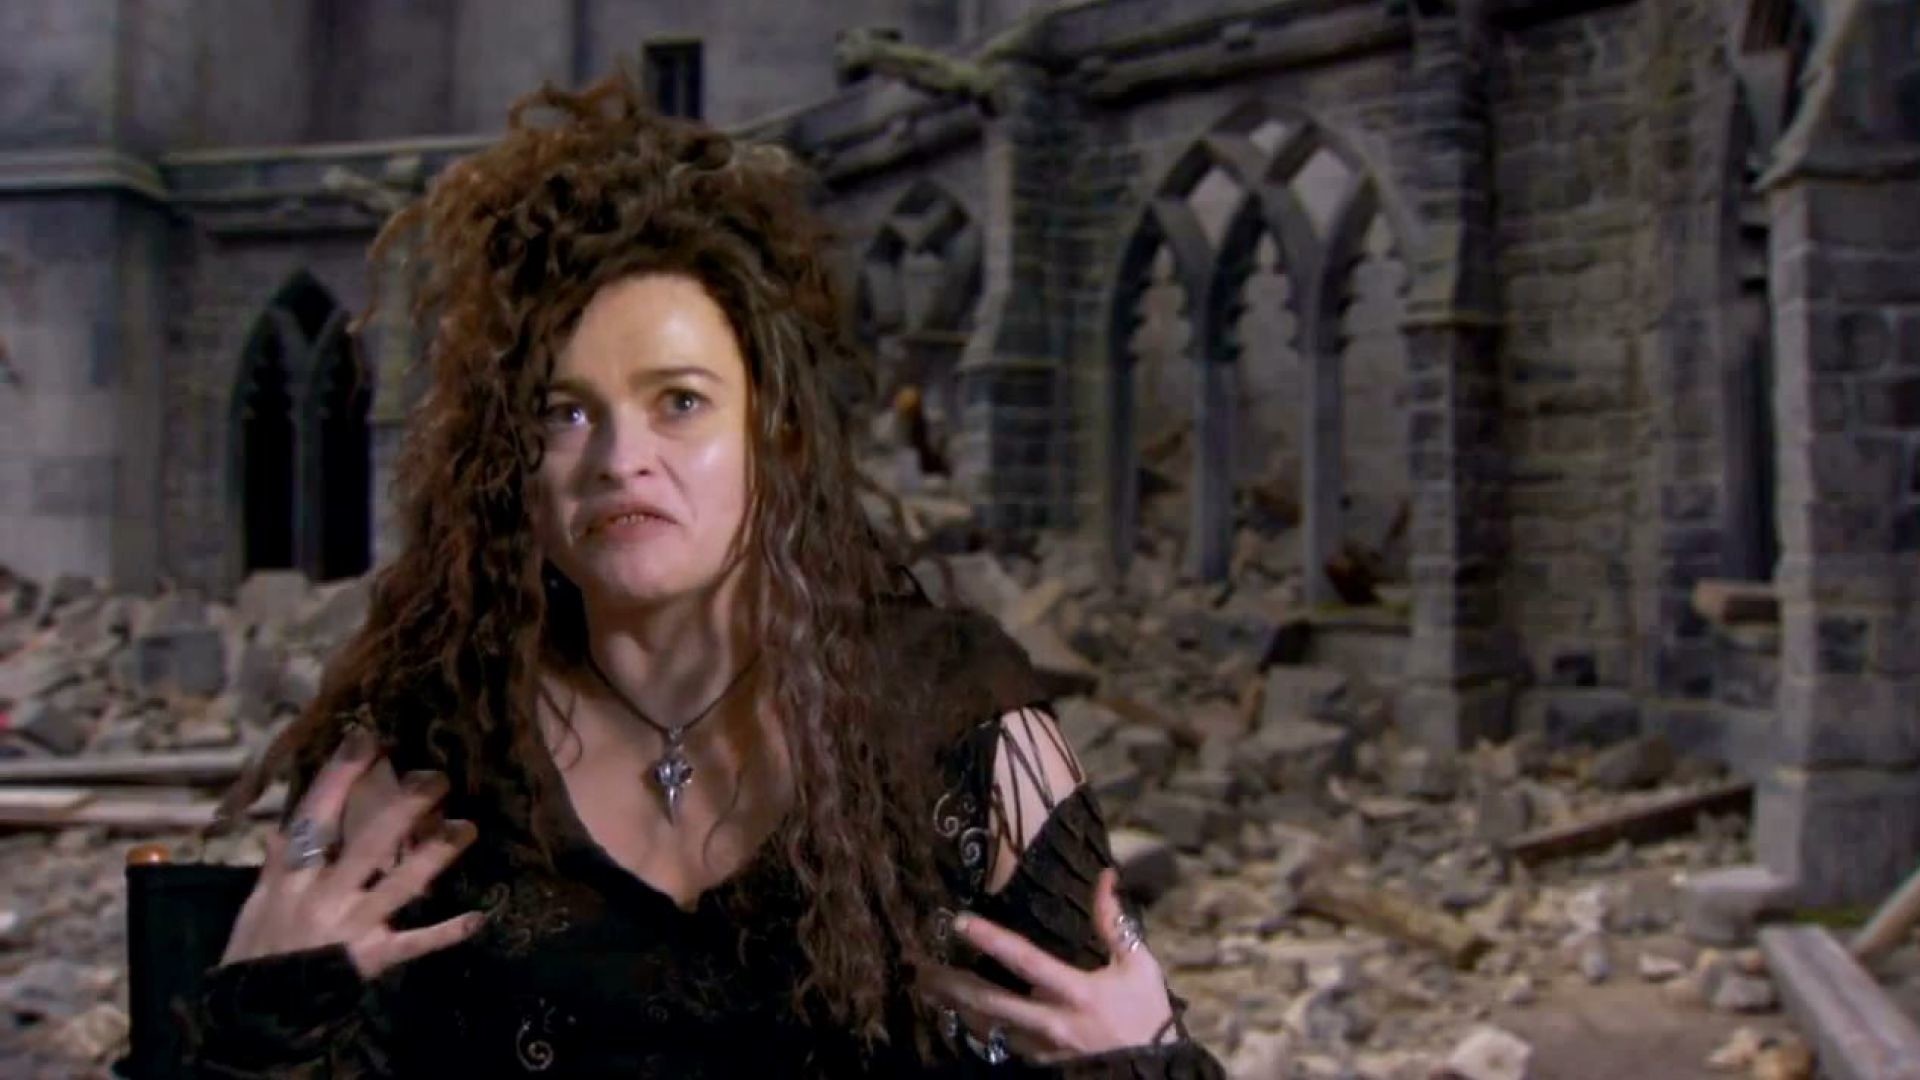 1920x1080 Helena Carter on playing Bellatrix in Harry Potter as therapy | Cultjer